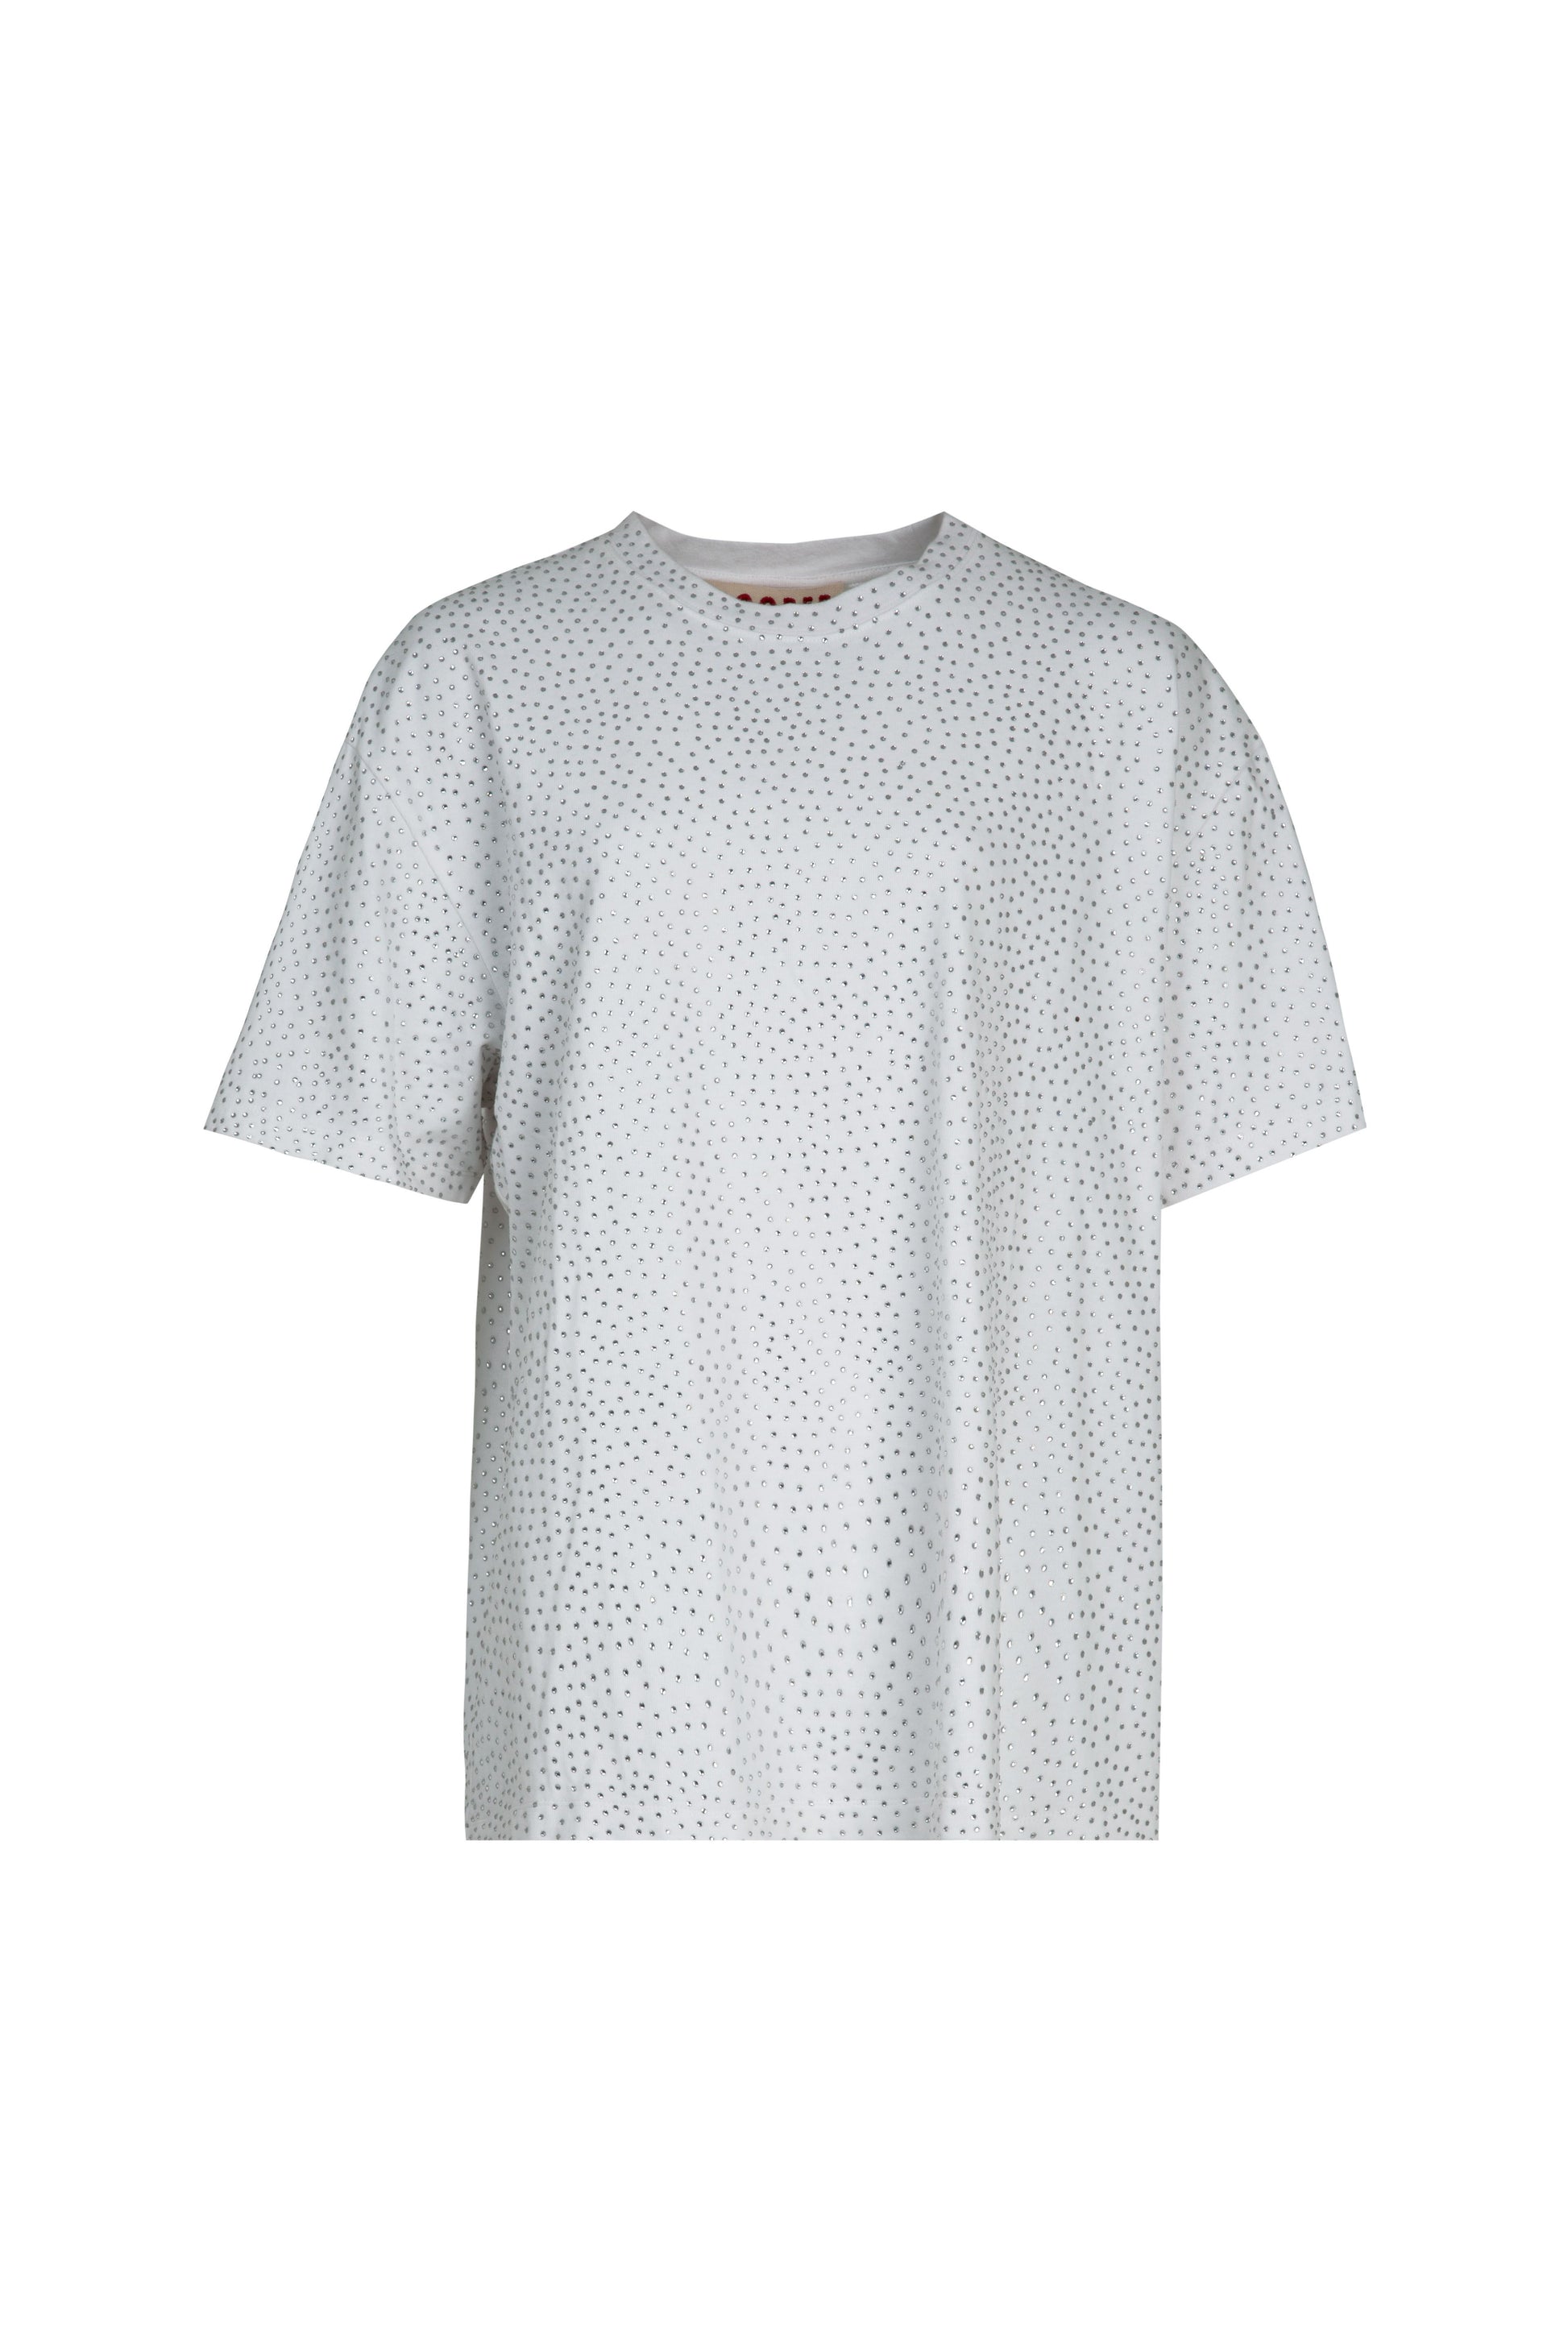 COOPER HERE FOR THE T T-SHIRT - WHITE - THE VOGUE STORE